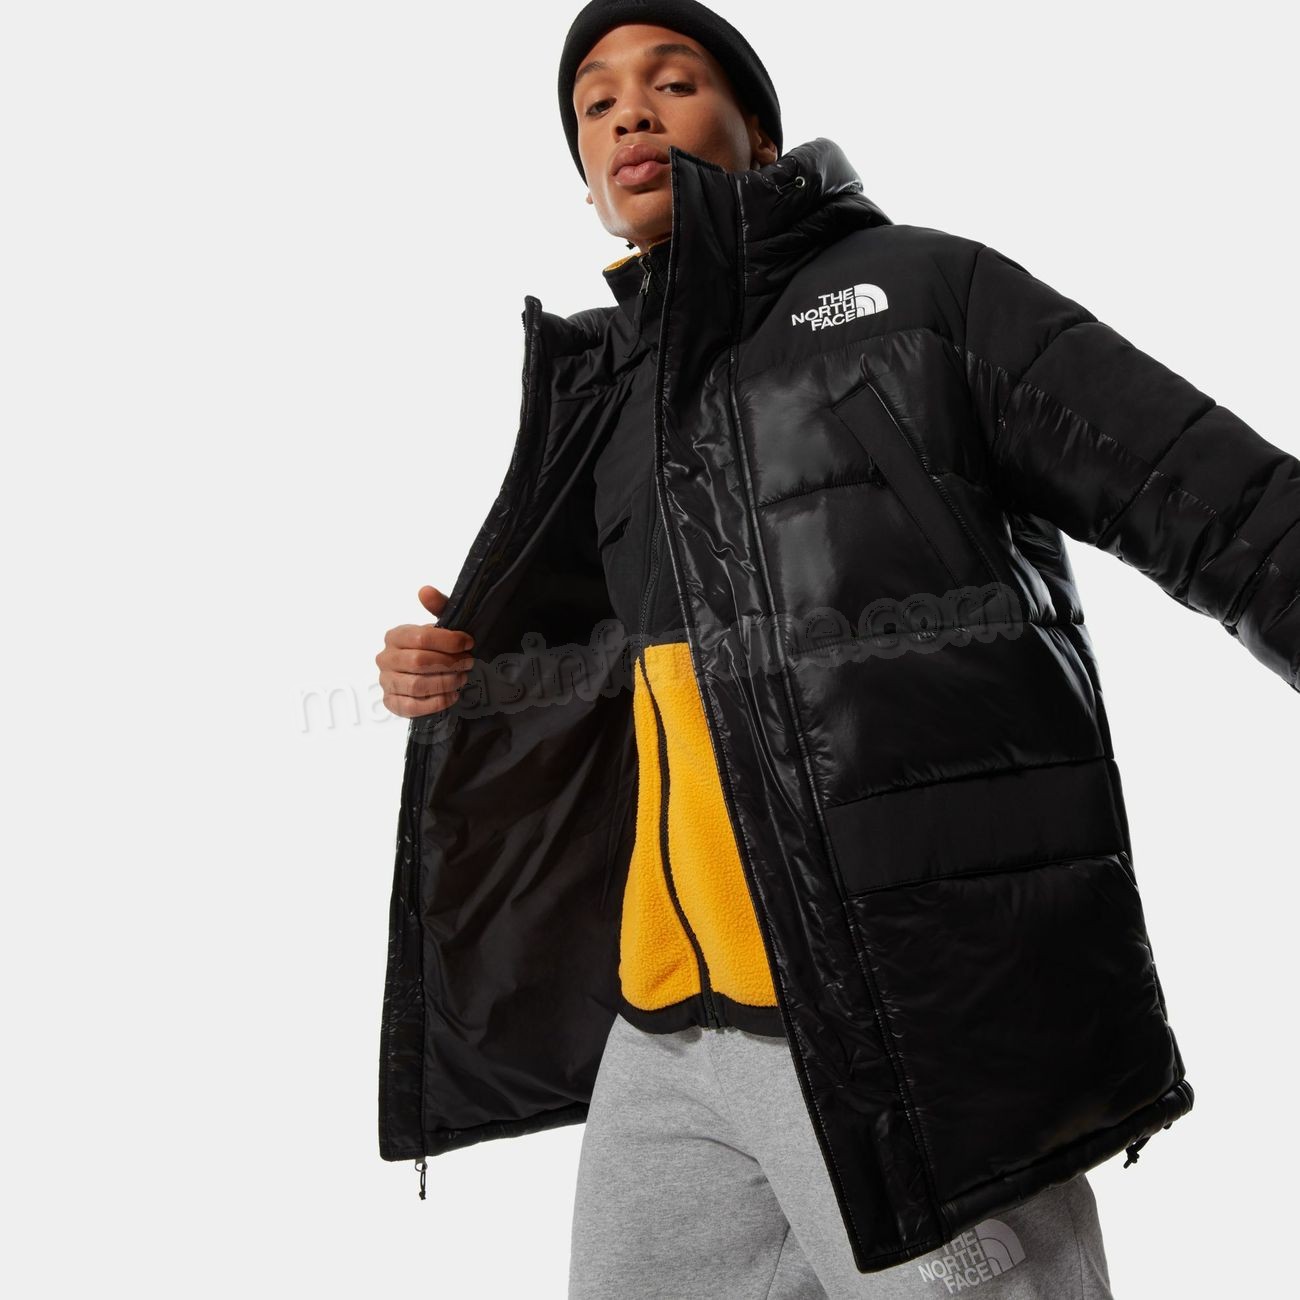 The North Face-mode homme THE NORTH FACE Himalayan Insulated Parka en solde - The North Face-mode homme THE NORTH FACE Himalayan Insulated Parka en solde